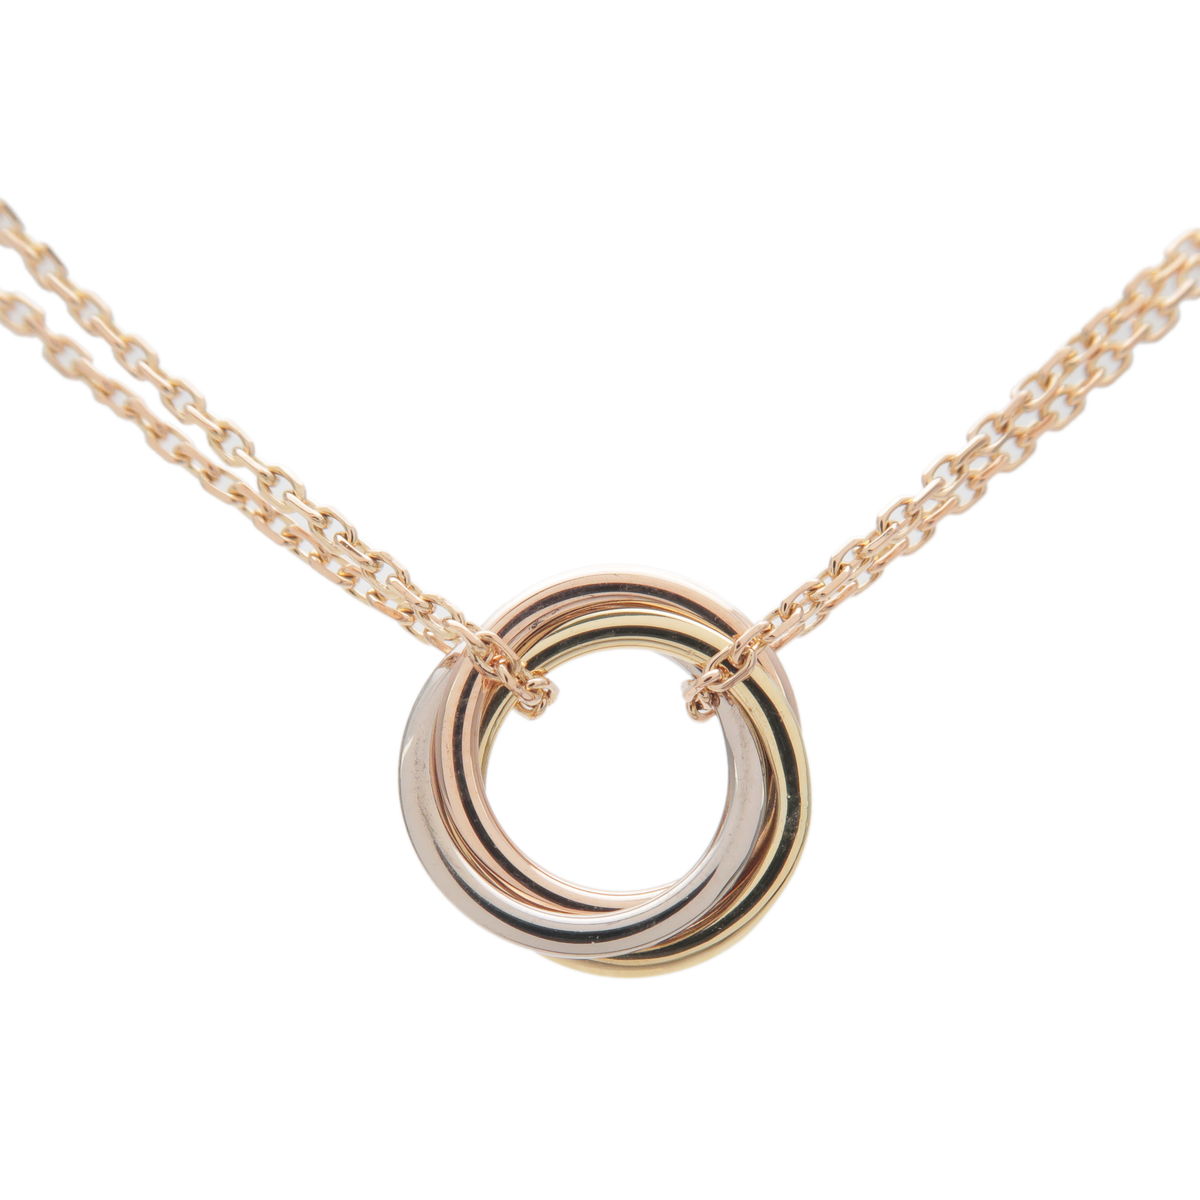 Cartier Sweet Trinity Necklace K18 750 Yellow/White/Rose Gold